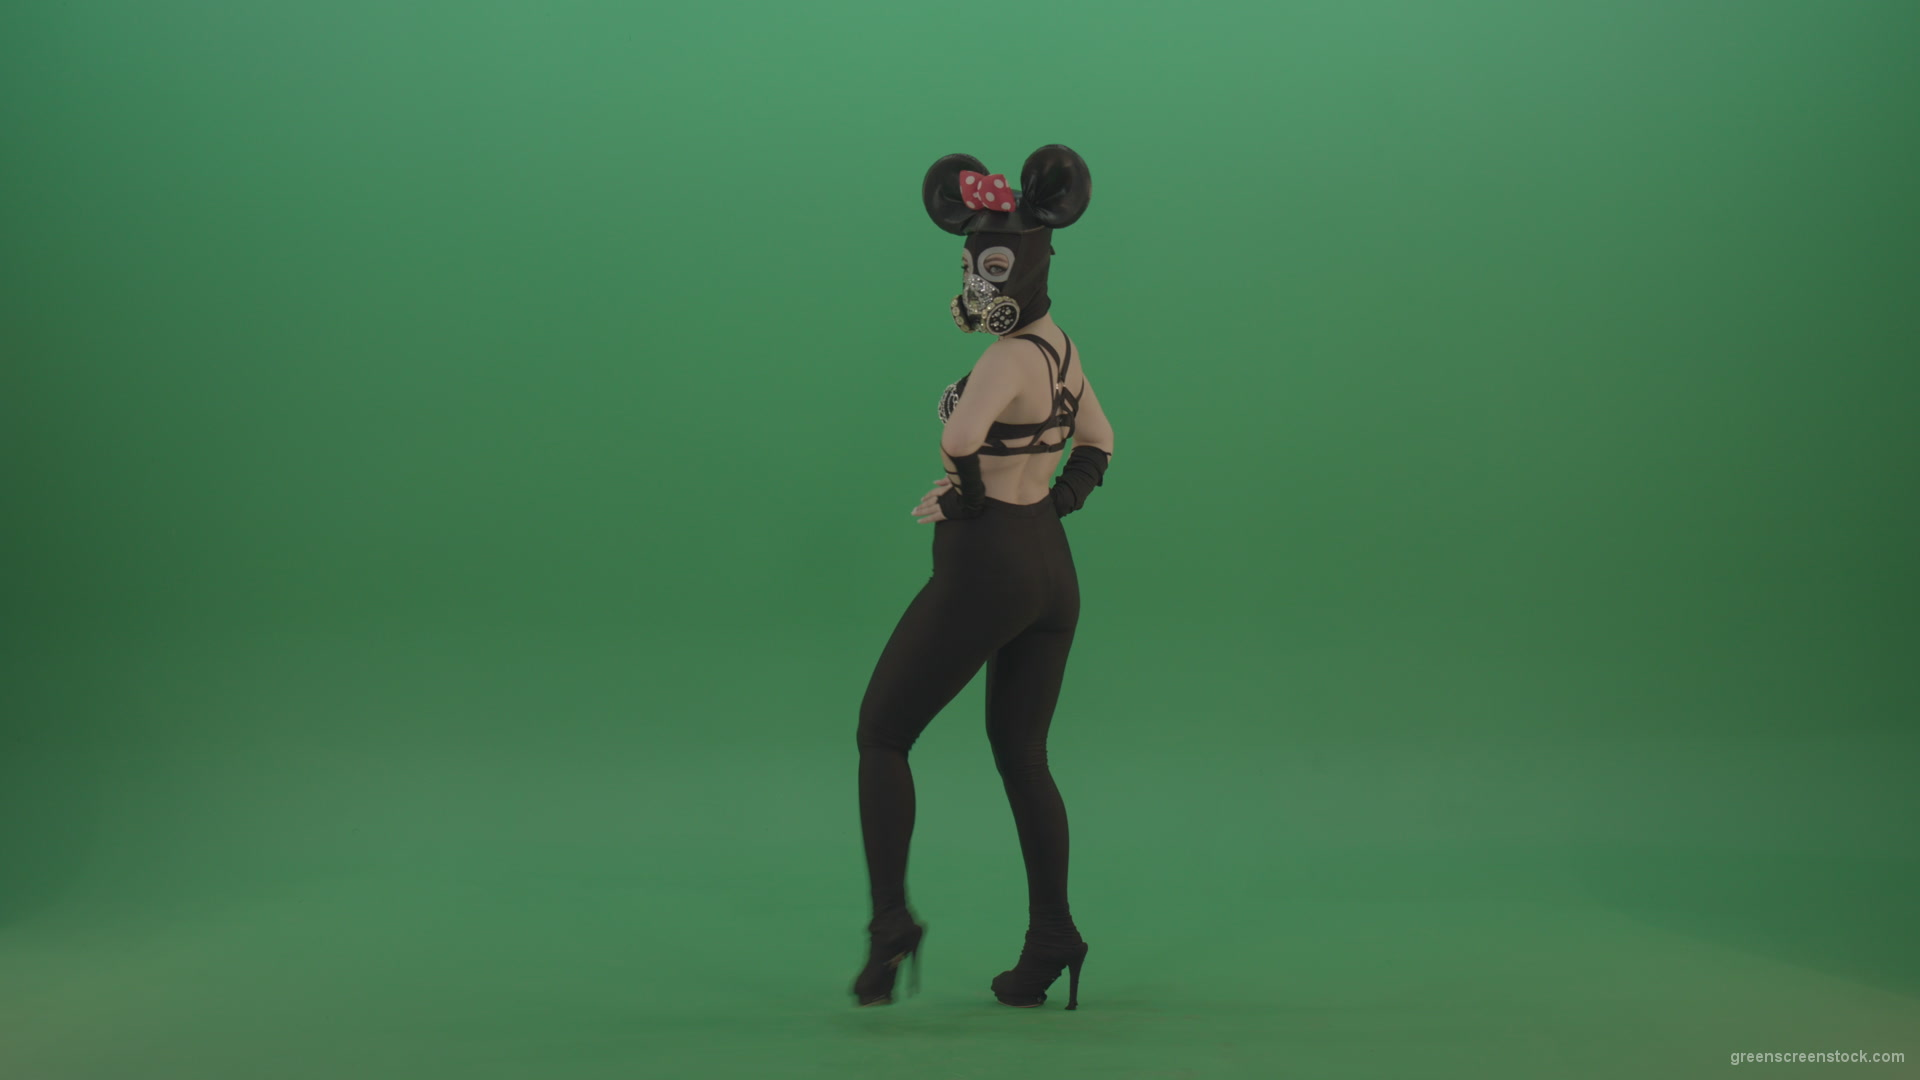 Mouse-Girl-in-mask-dancing-go-go-shaking-ass-and-posing-on-green-screen_009 Green Screen Stock